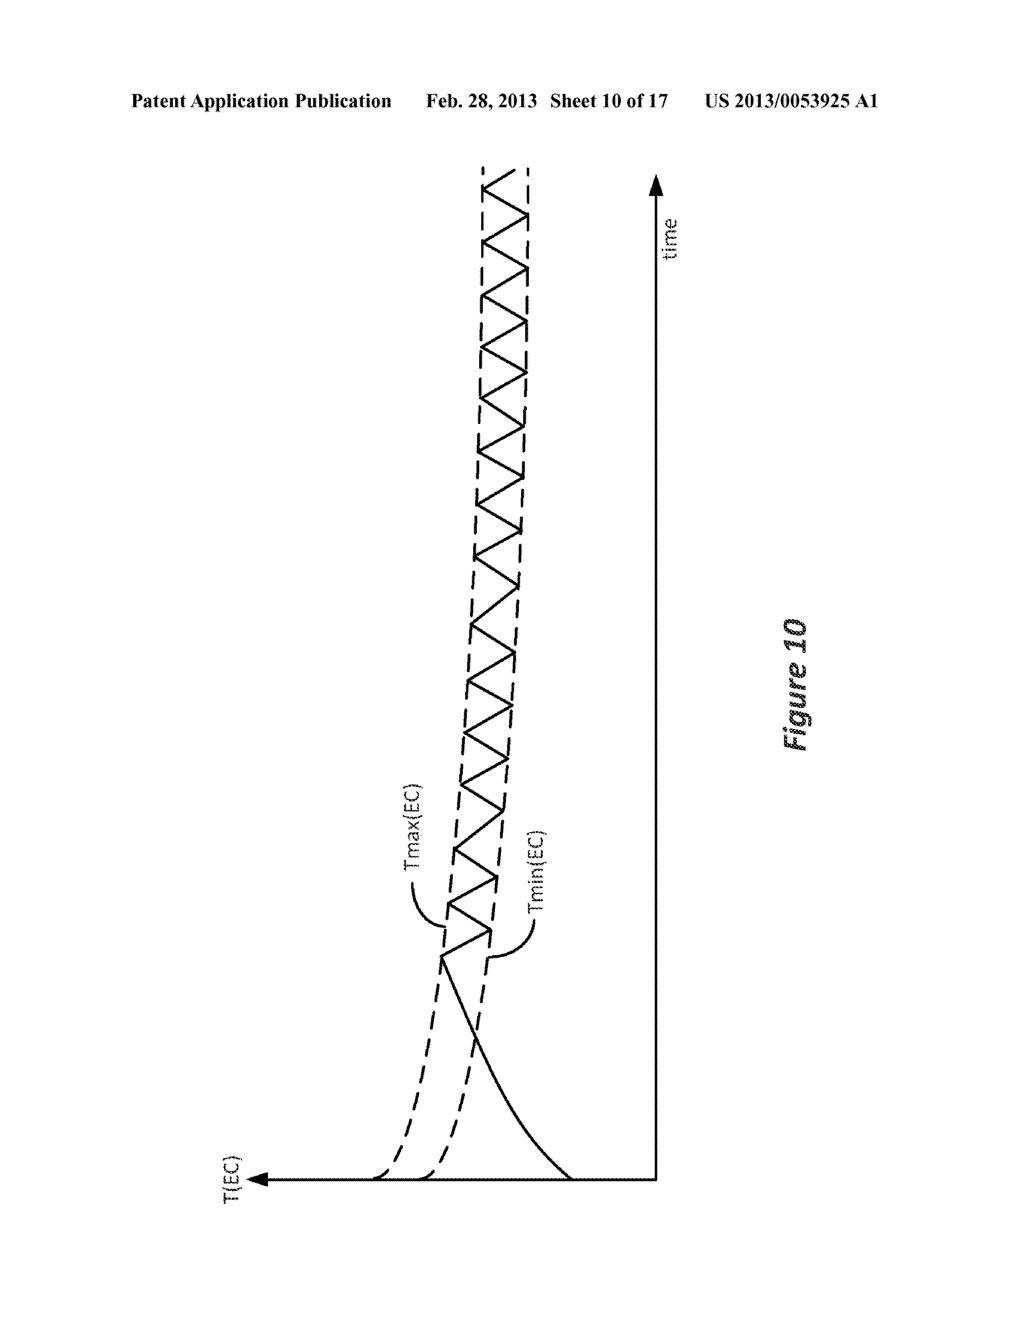 External Charger Usable with an Implantable Medical Device Having a     Programmable or Time-Varying Temperature Set Point - diagram, schematic, and image 11